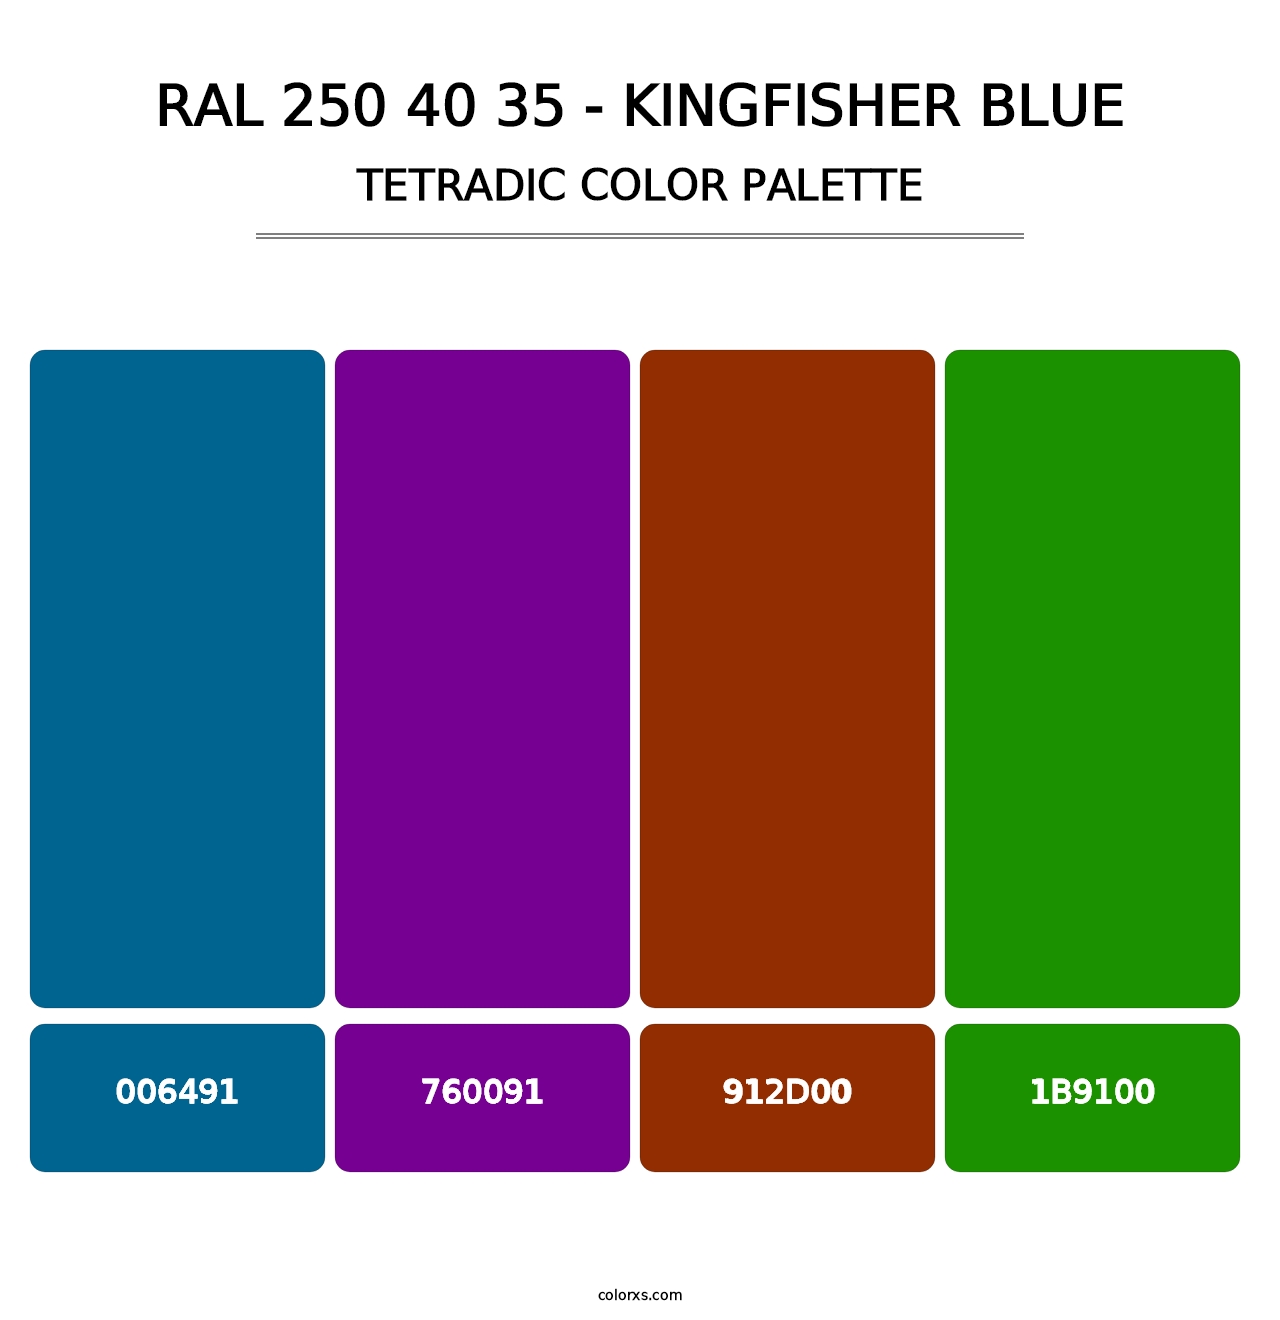 RAL 250 40 35 - Kingfisher Blue - Tetradic Color Palette